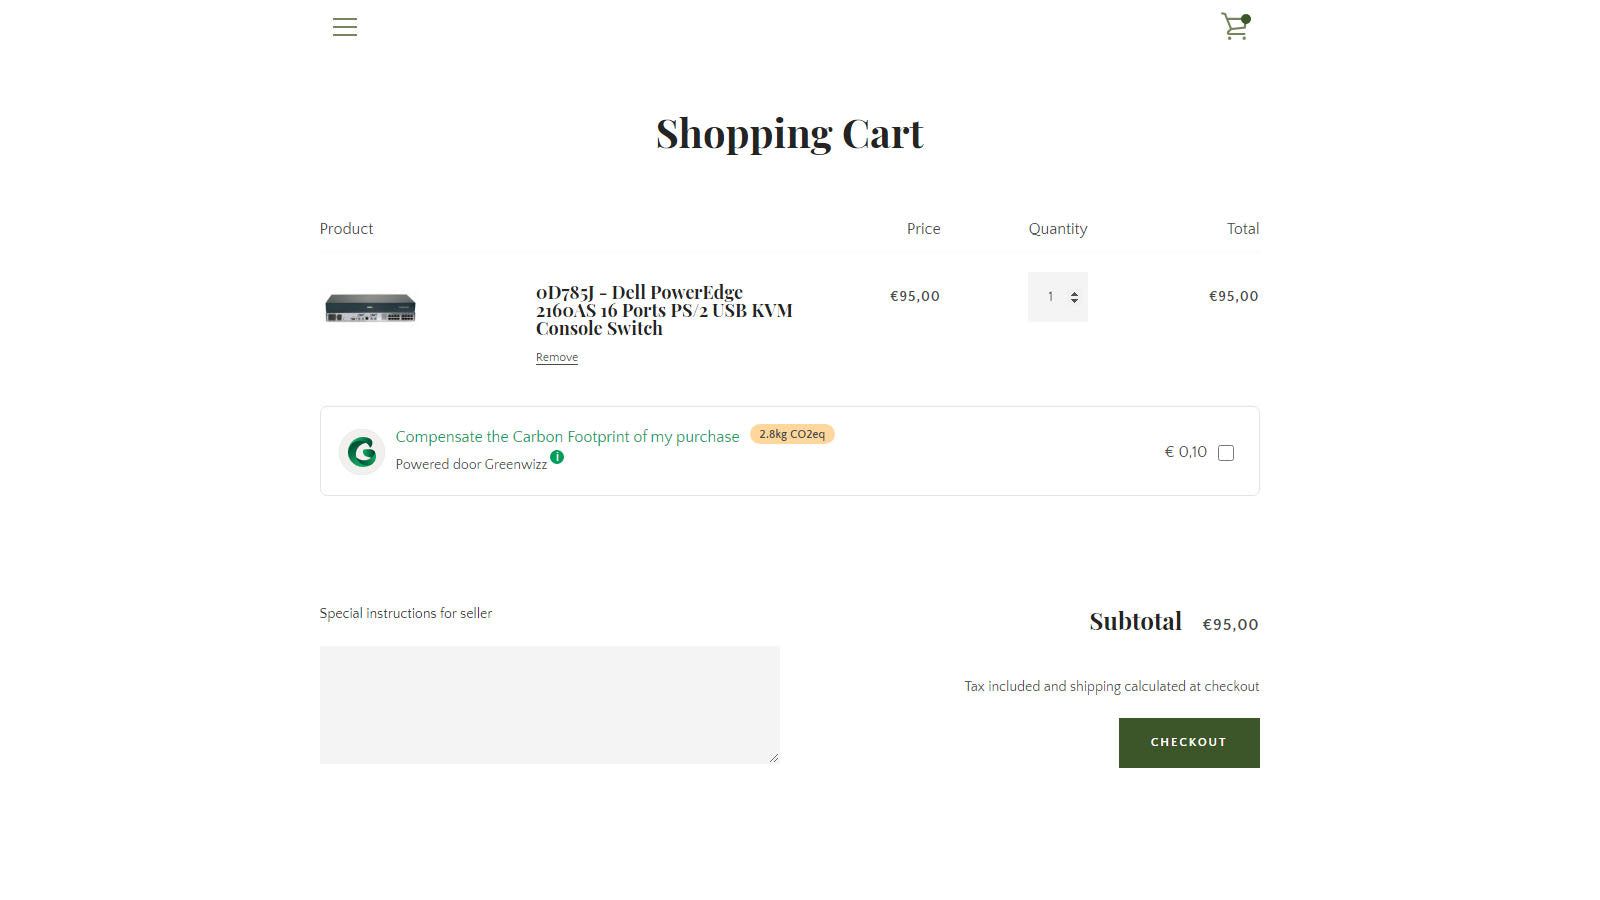 Our app in action in the cart